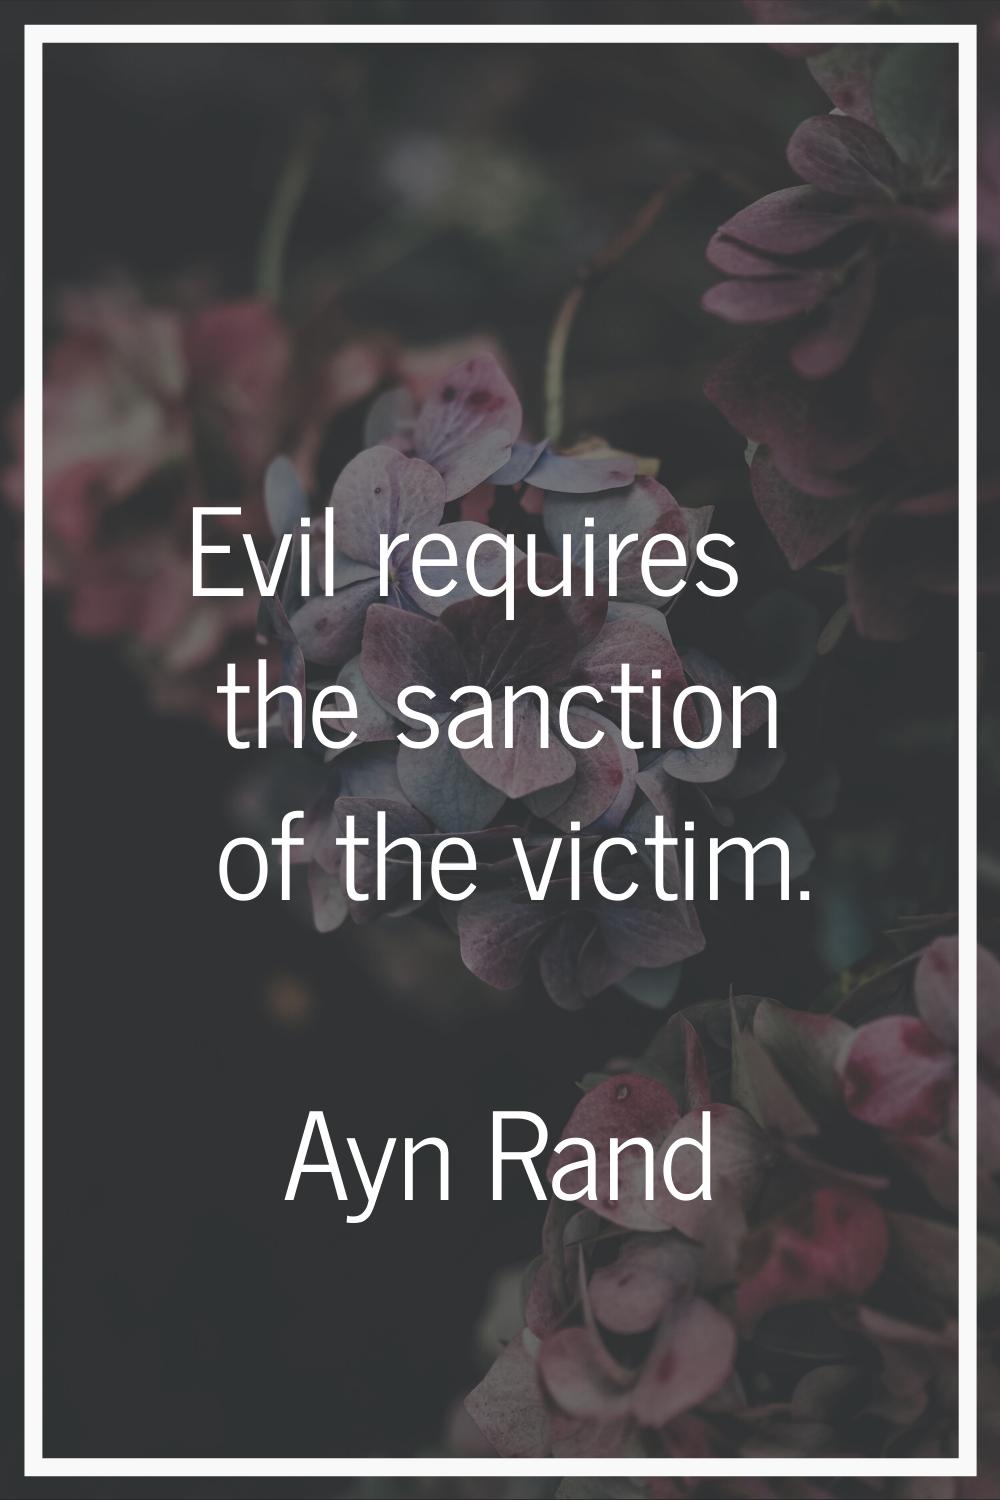 Evil requires the sanction of the victim.